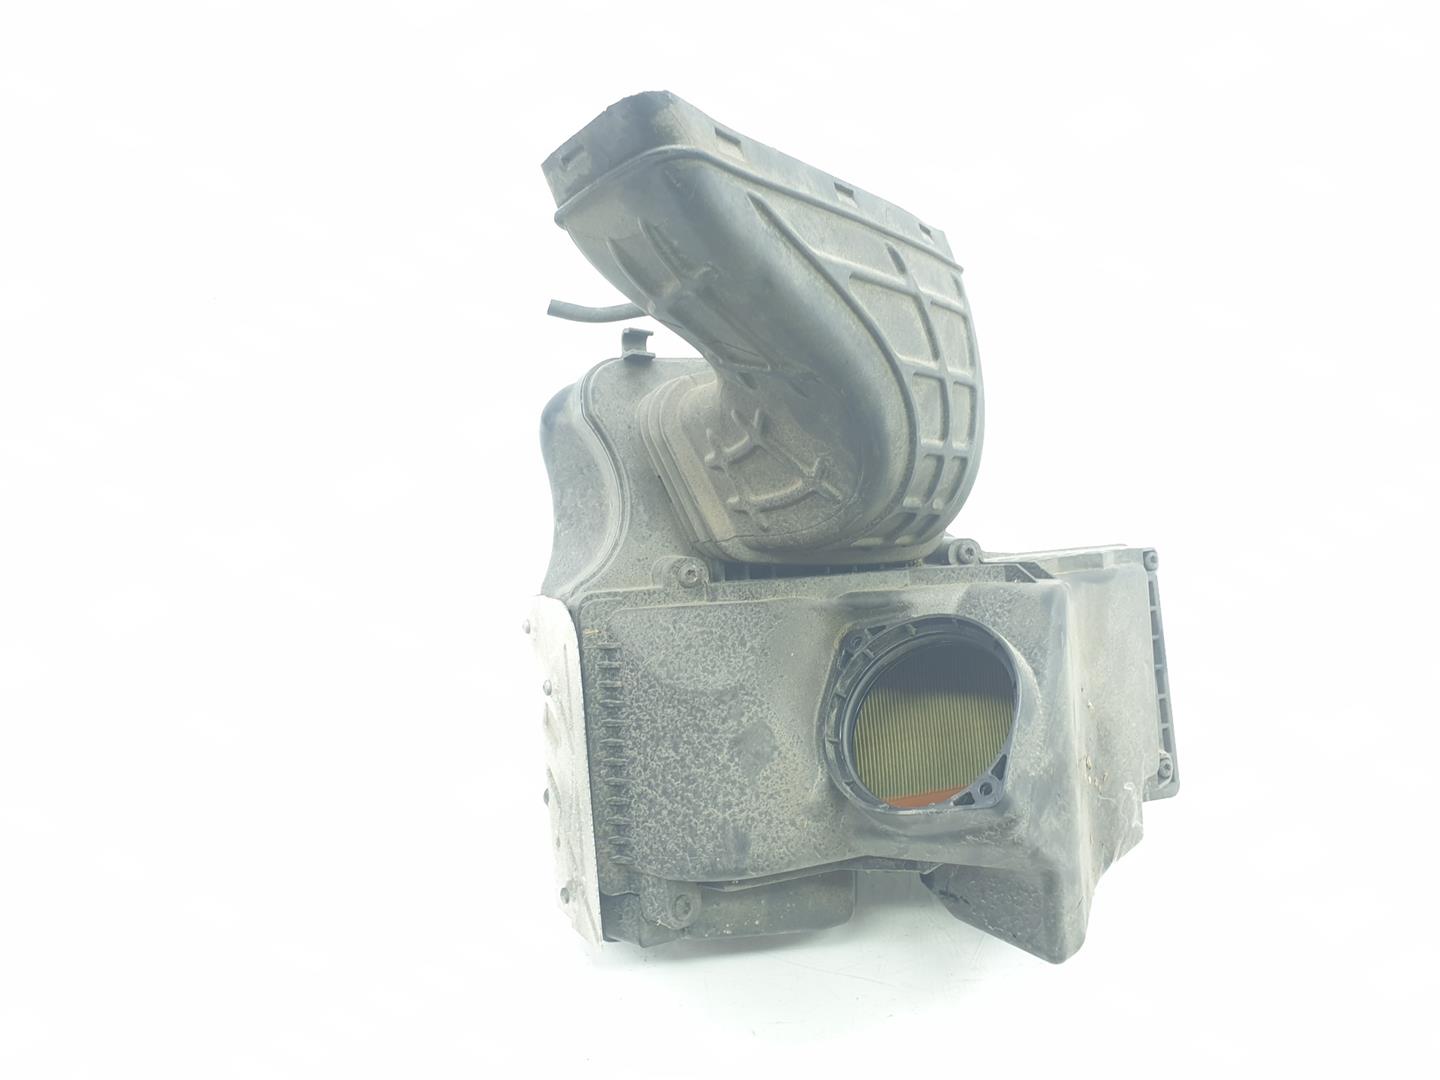 AUDI A4 B8/8K (2011-2016) Other Engine Compartment Parts 8K0133837T, 8K0133837BF 24386953